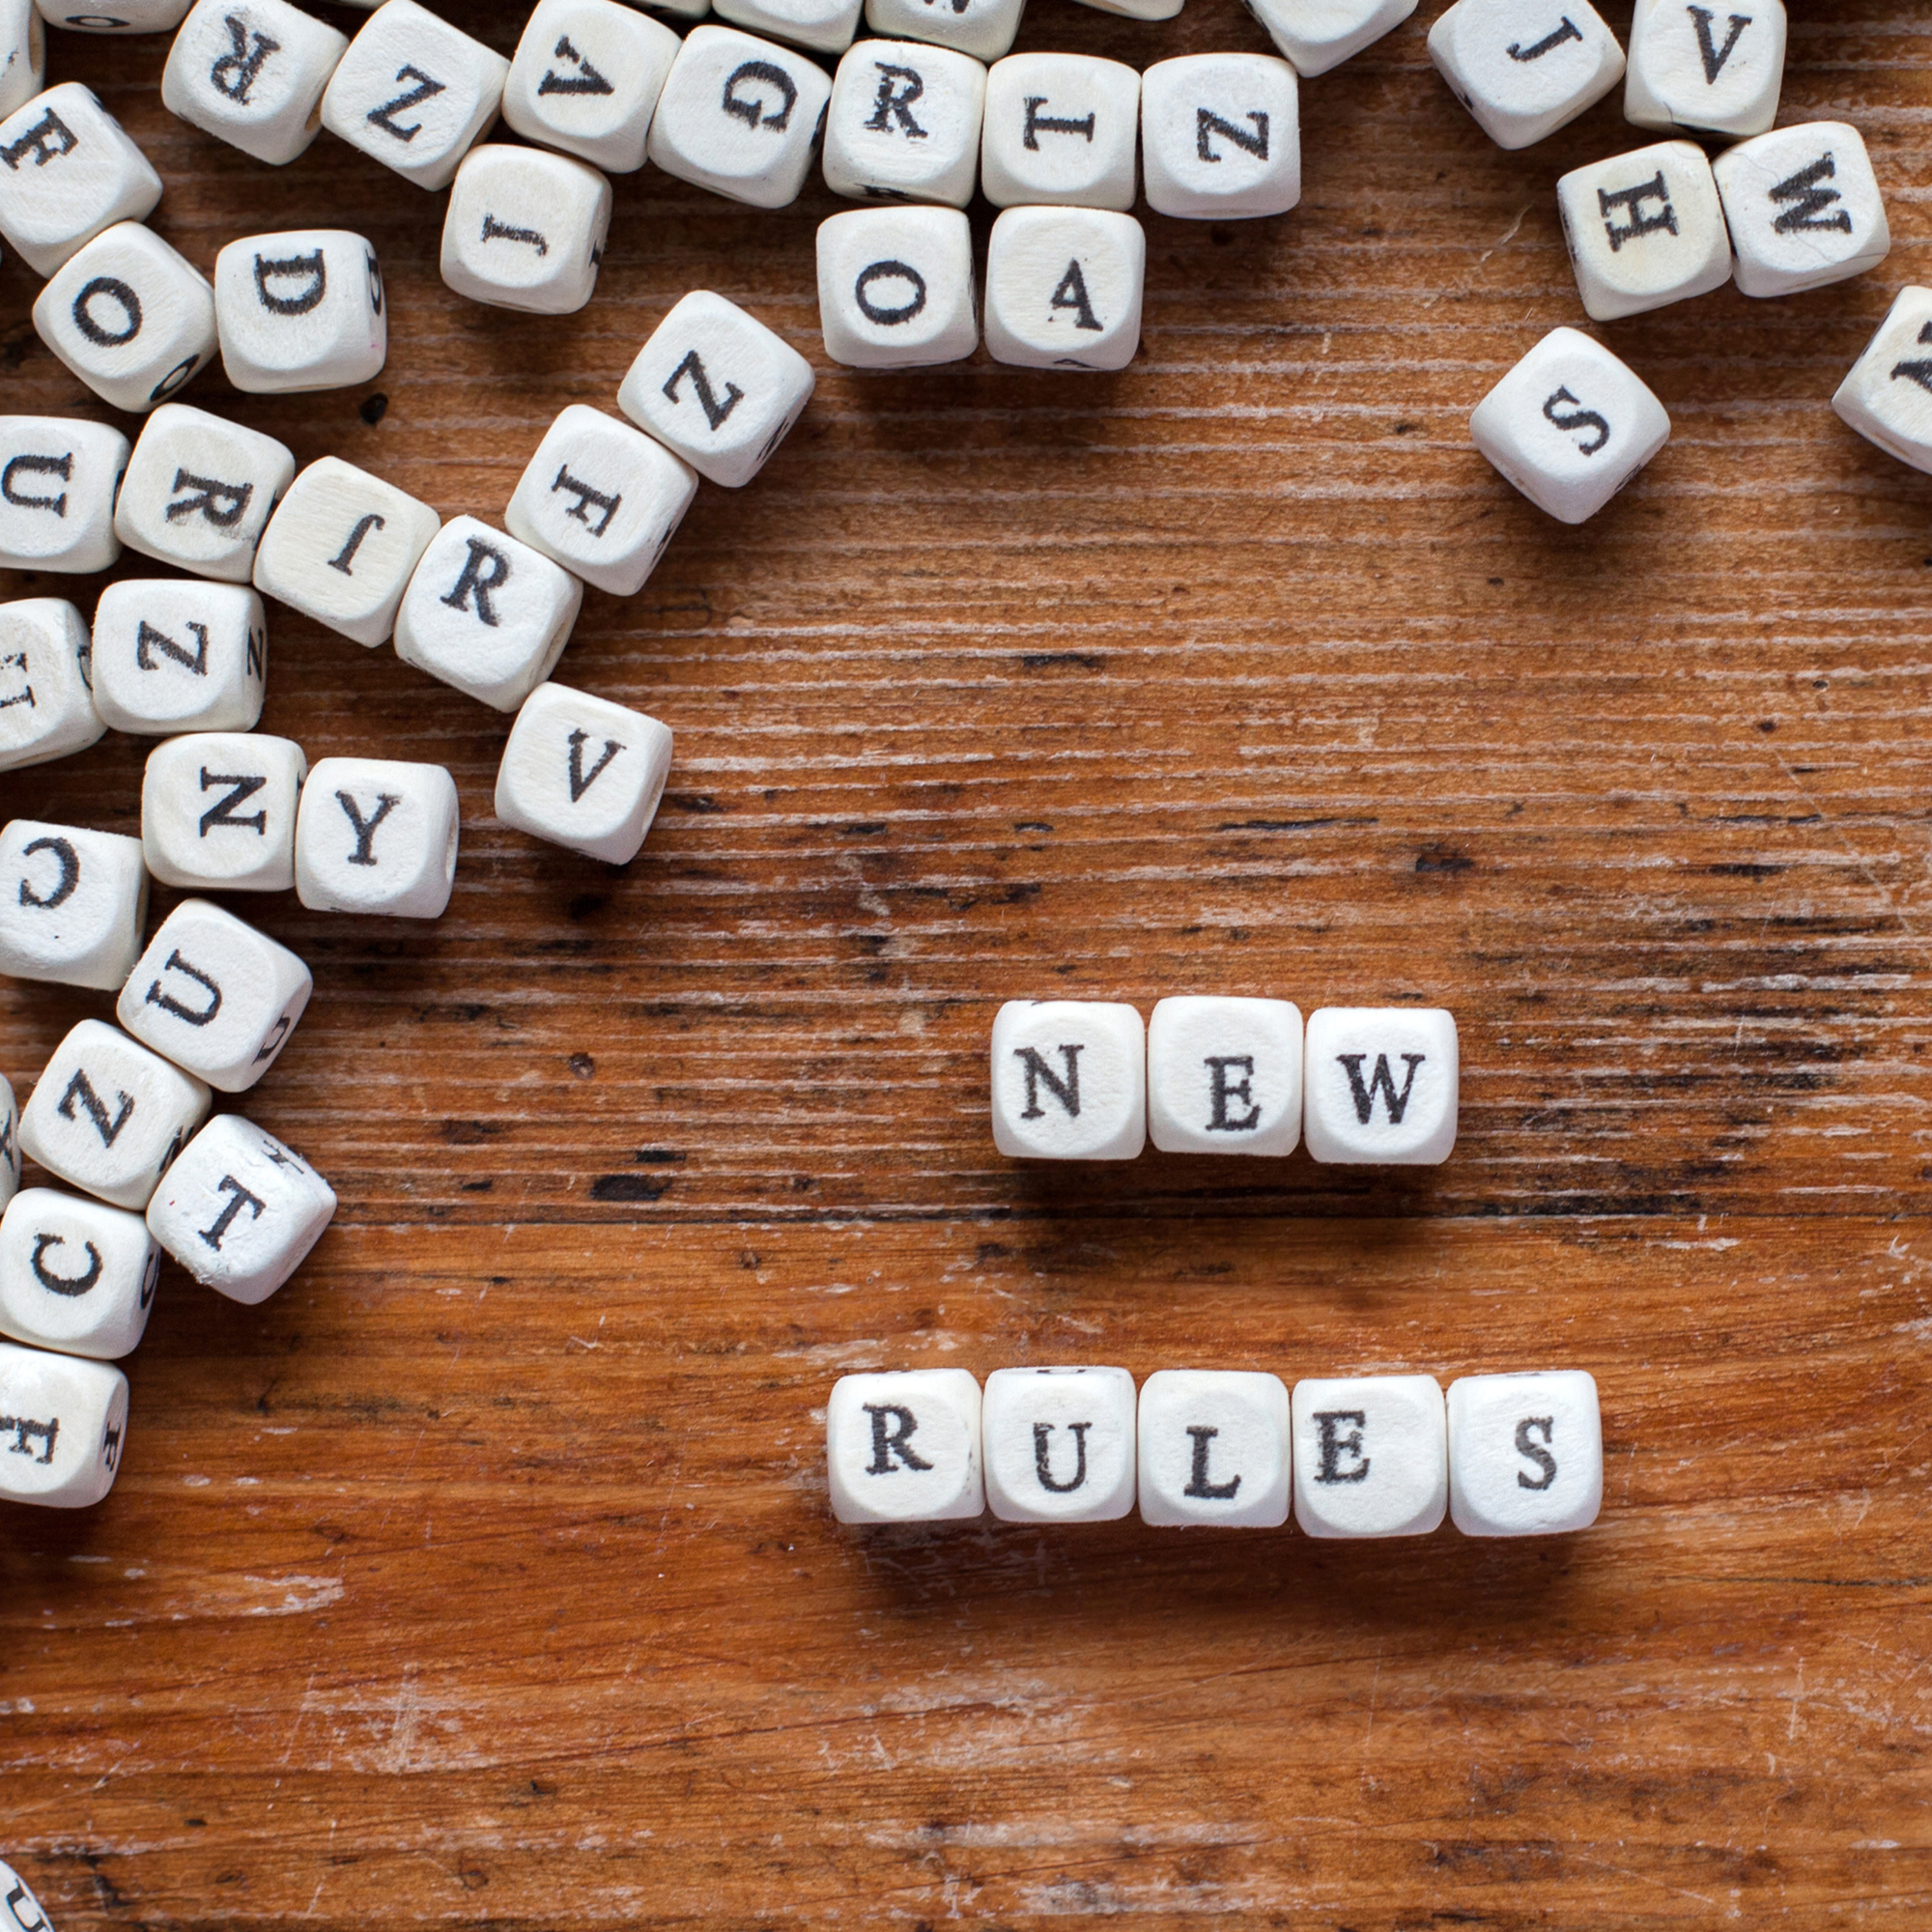 Photo of a wooden table with letter blocks that spell out "new rules/"